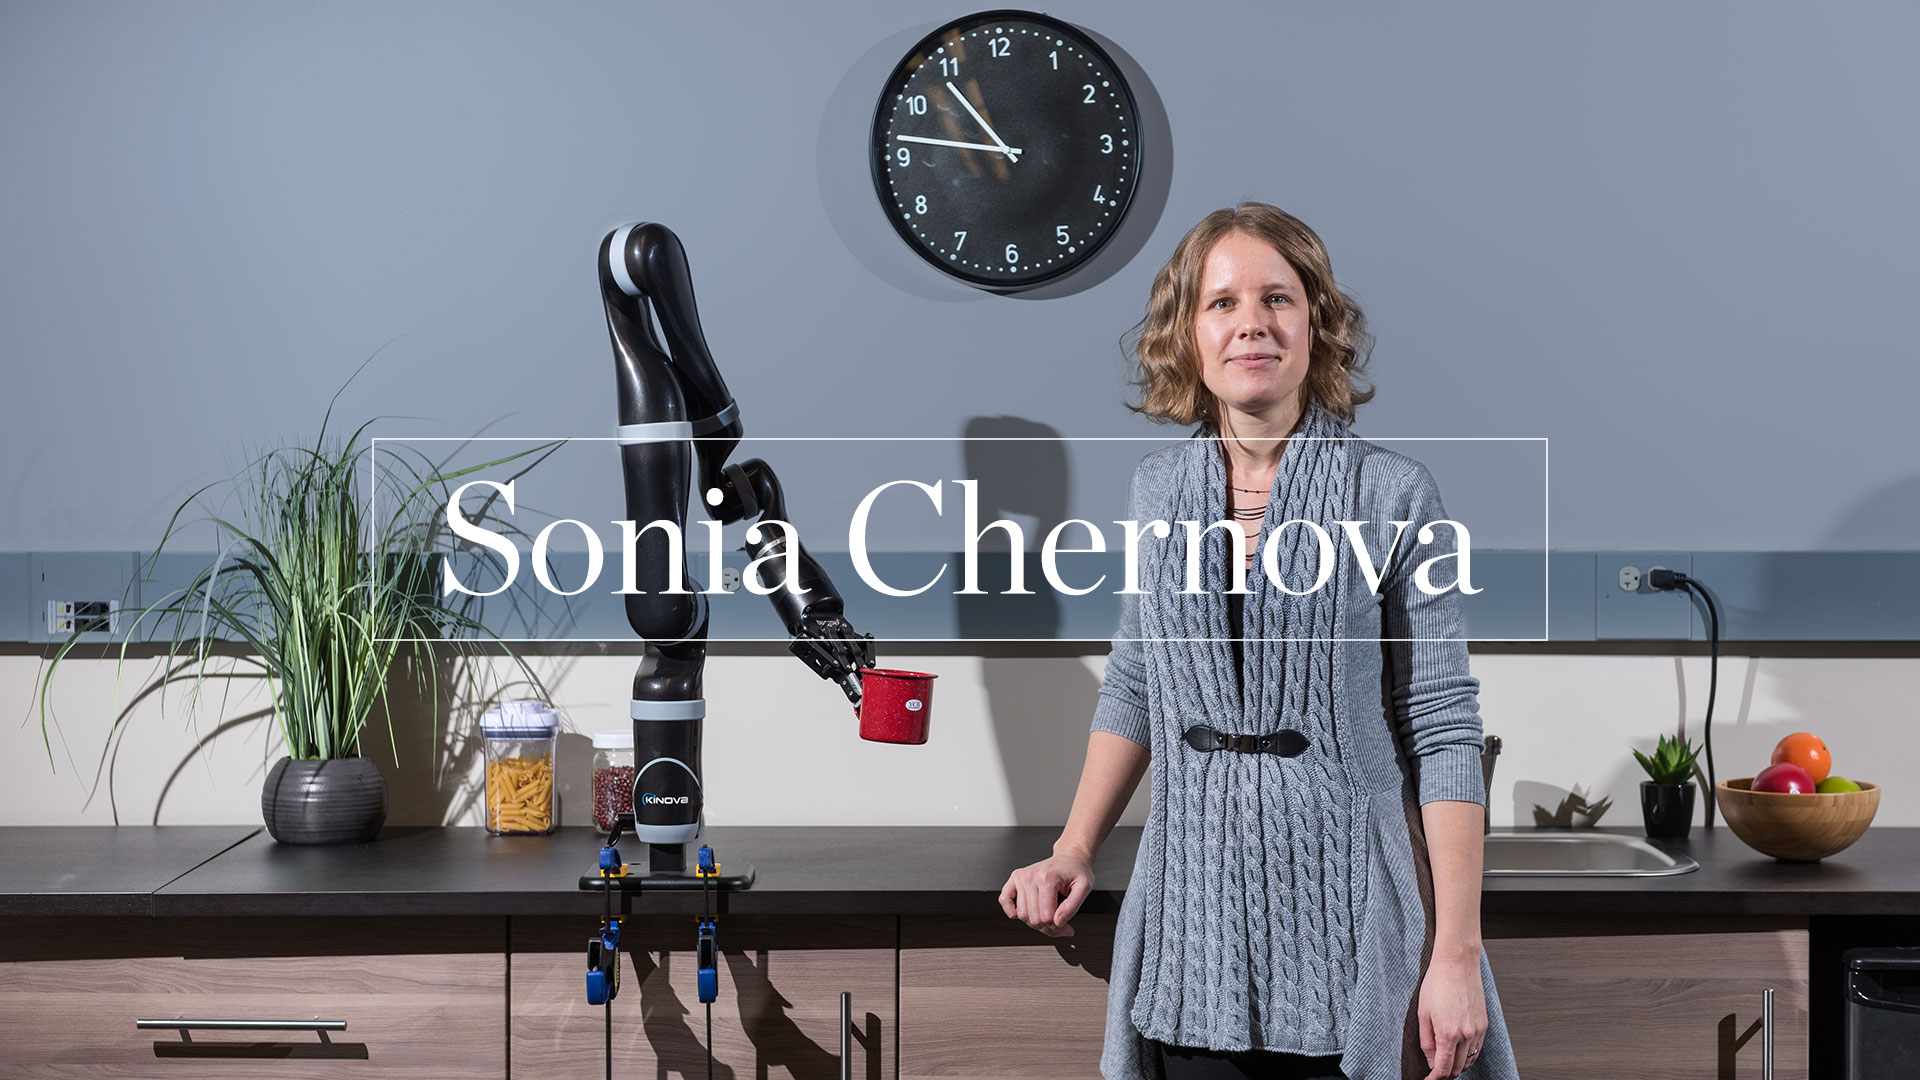 photo -  Sonia Chernova standing in front of counter, with robotic arm mounted to counter top,holding a drink mug